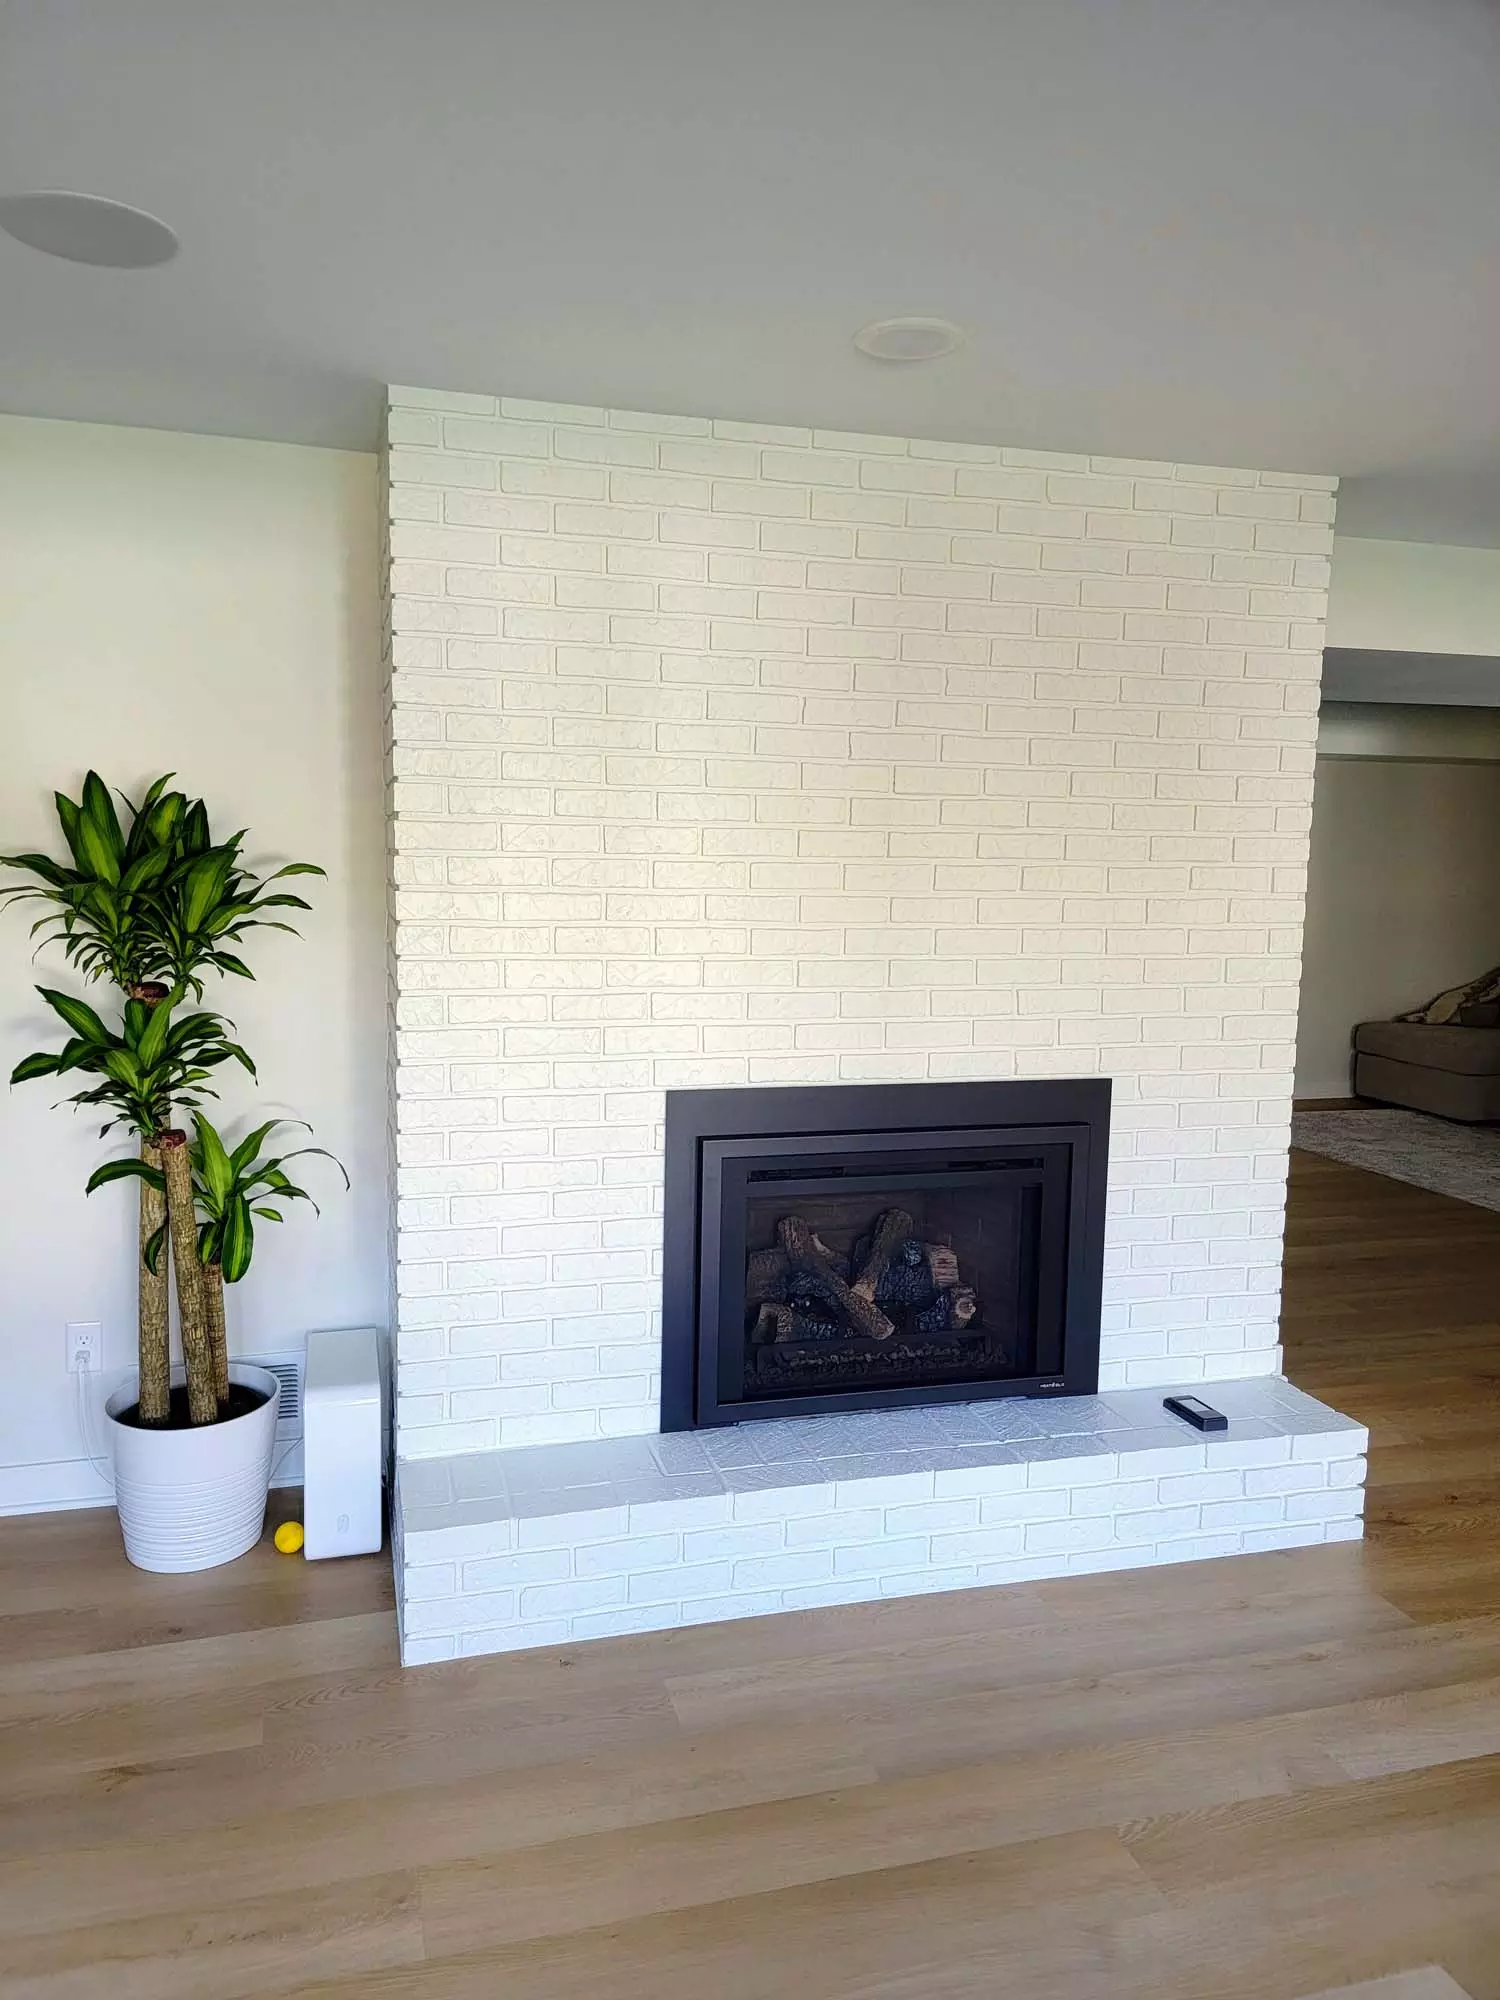 Insert Gas Fireplace w/ updated painted existing brick